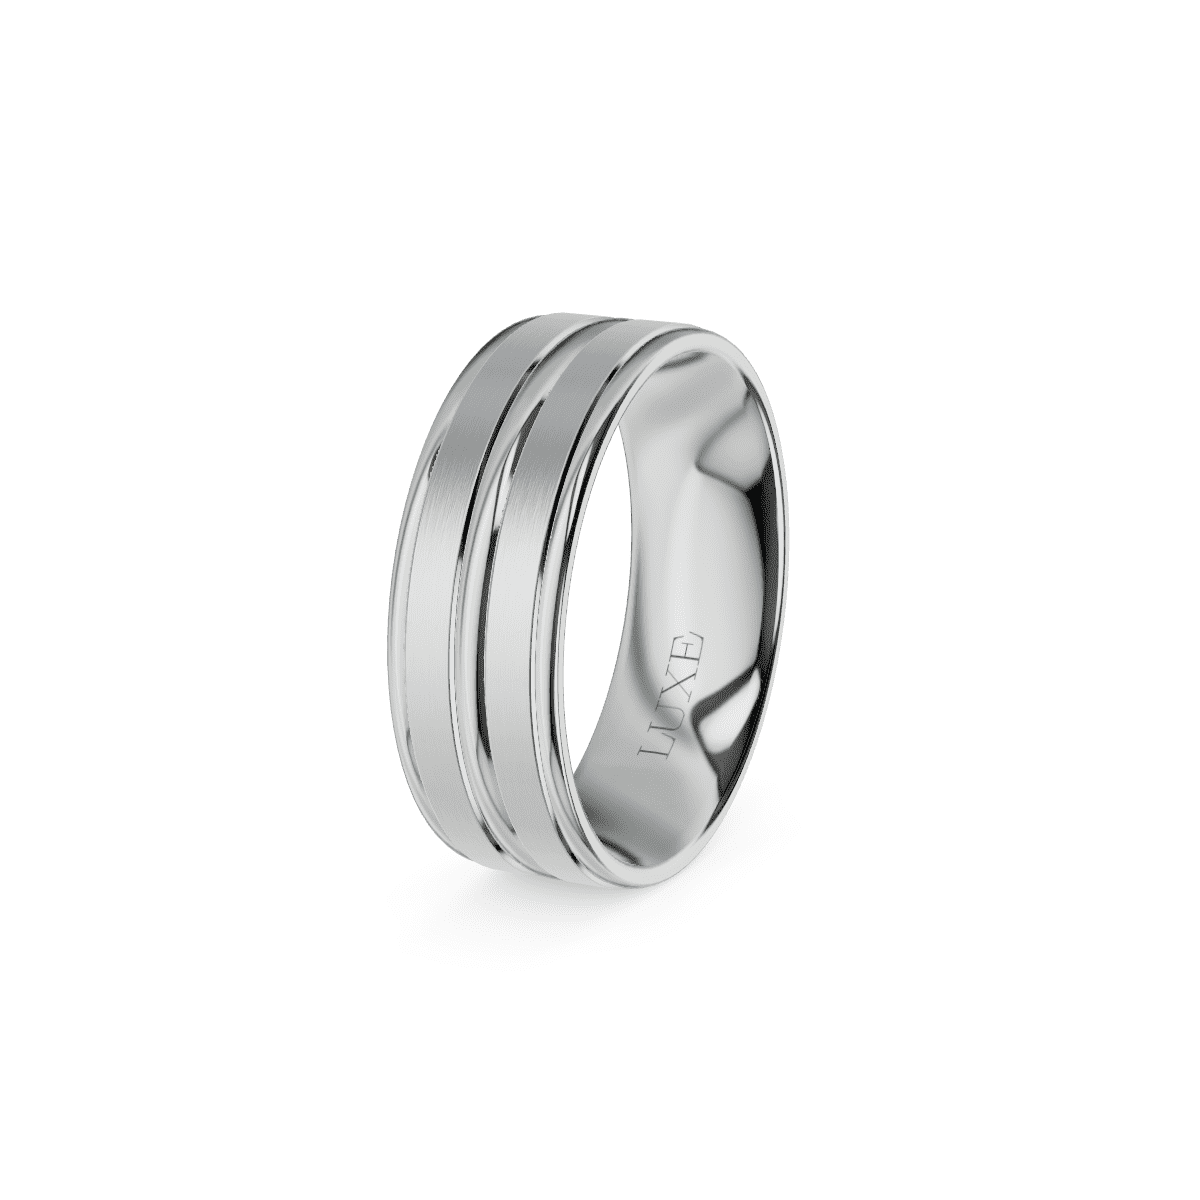 DOVER-SI ring - Luxe Wedding Rings